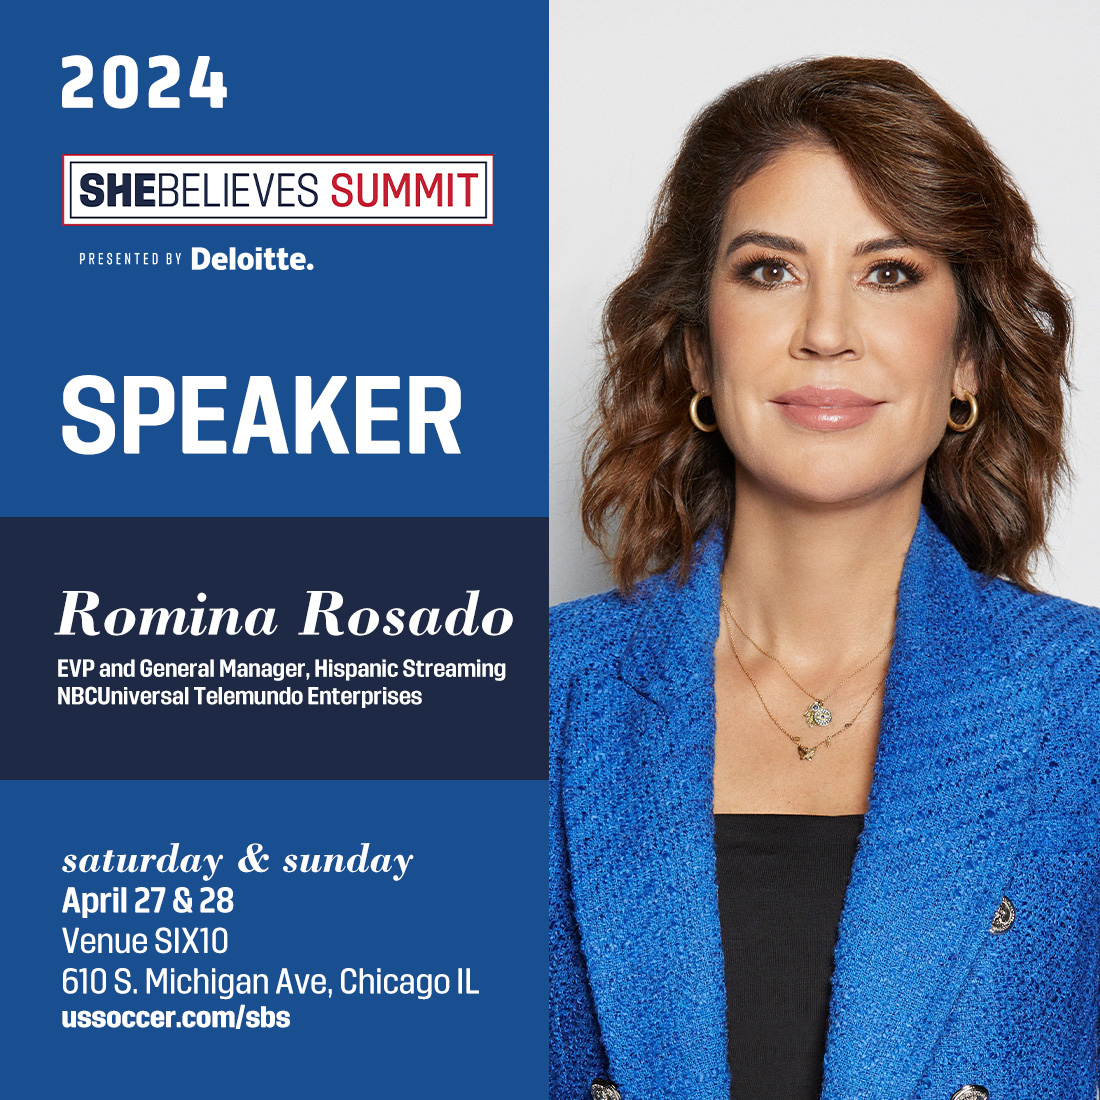 NBC Universal Telemundo's EVP and General Manager of Hispanic Streaming Romina Rosado has been added to the 2024 SheBelieves Summit, presented by @DeloitteUS!